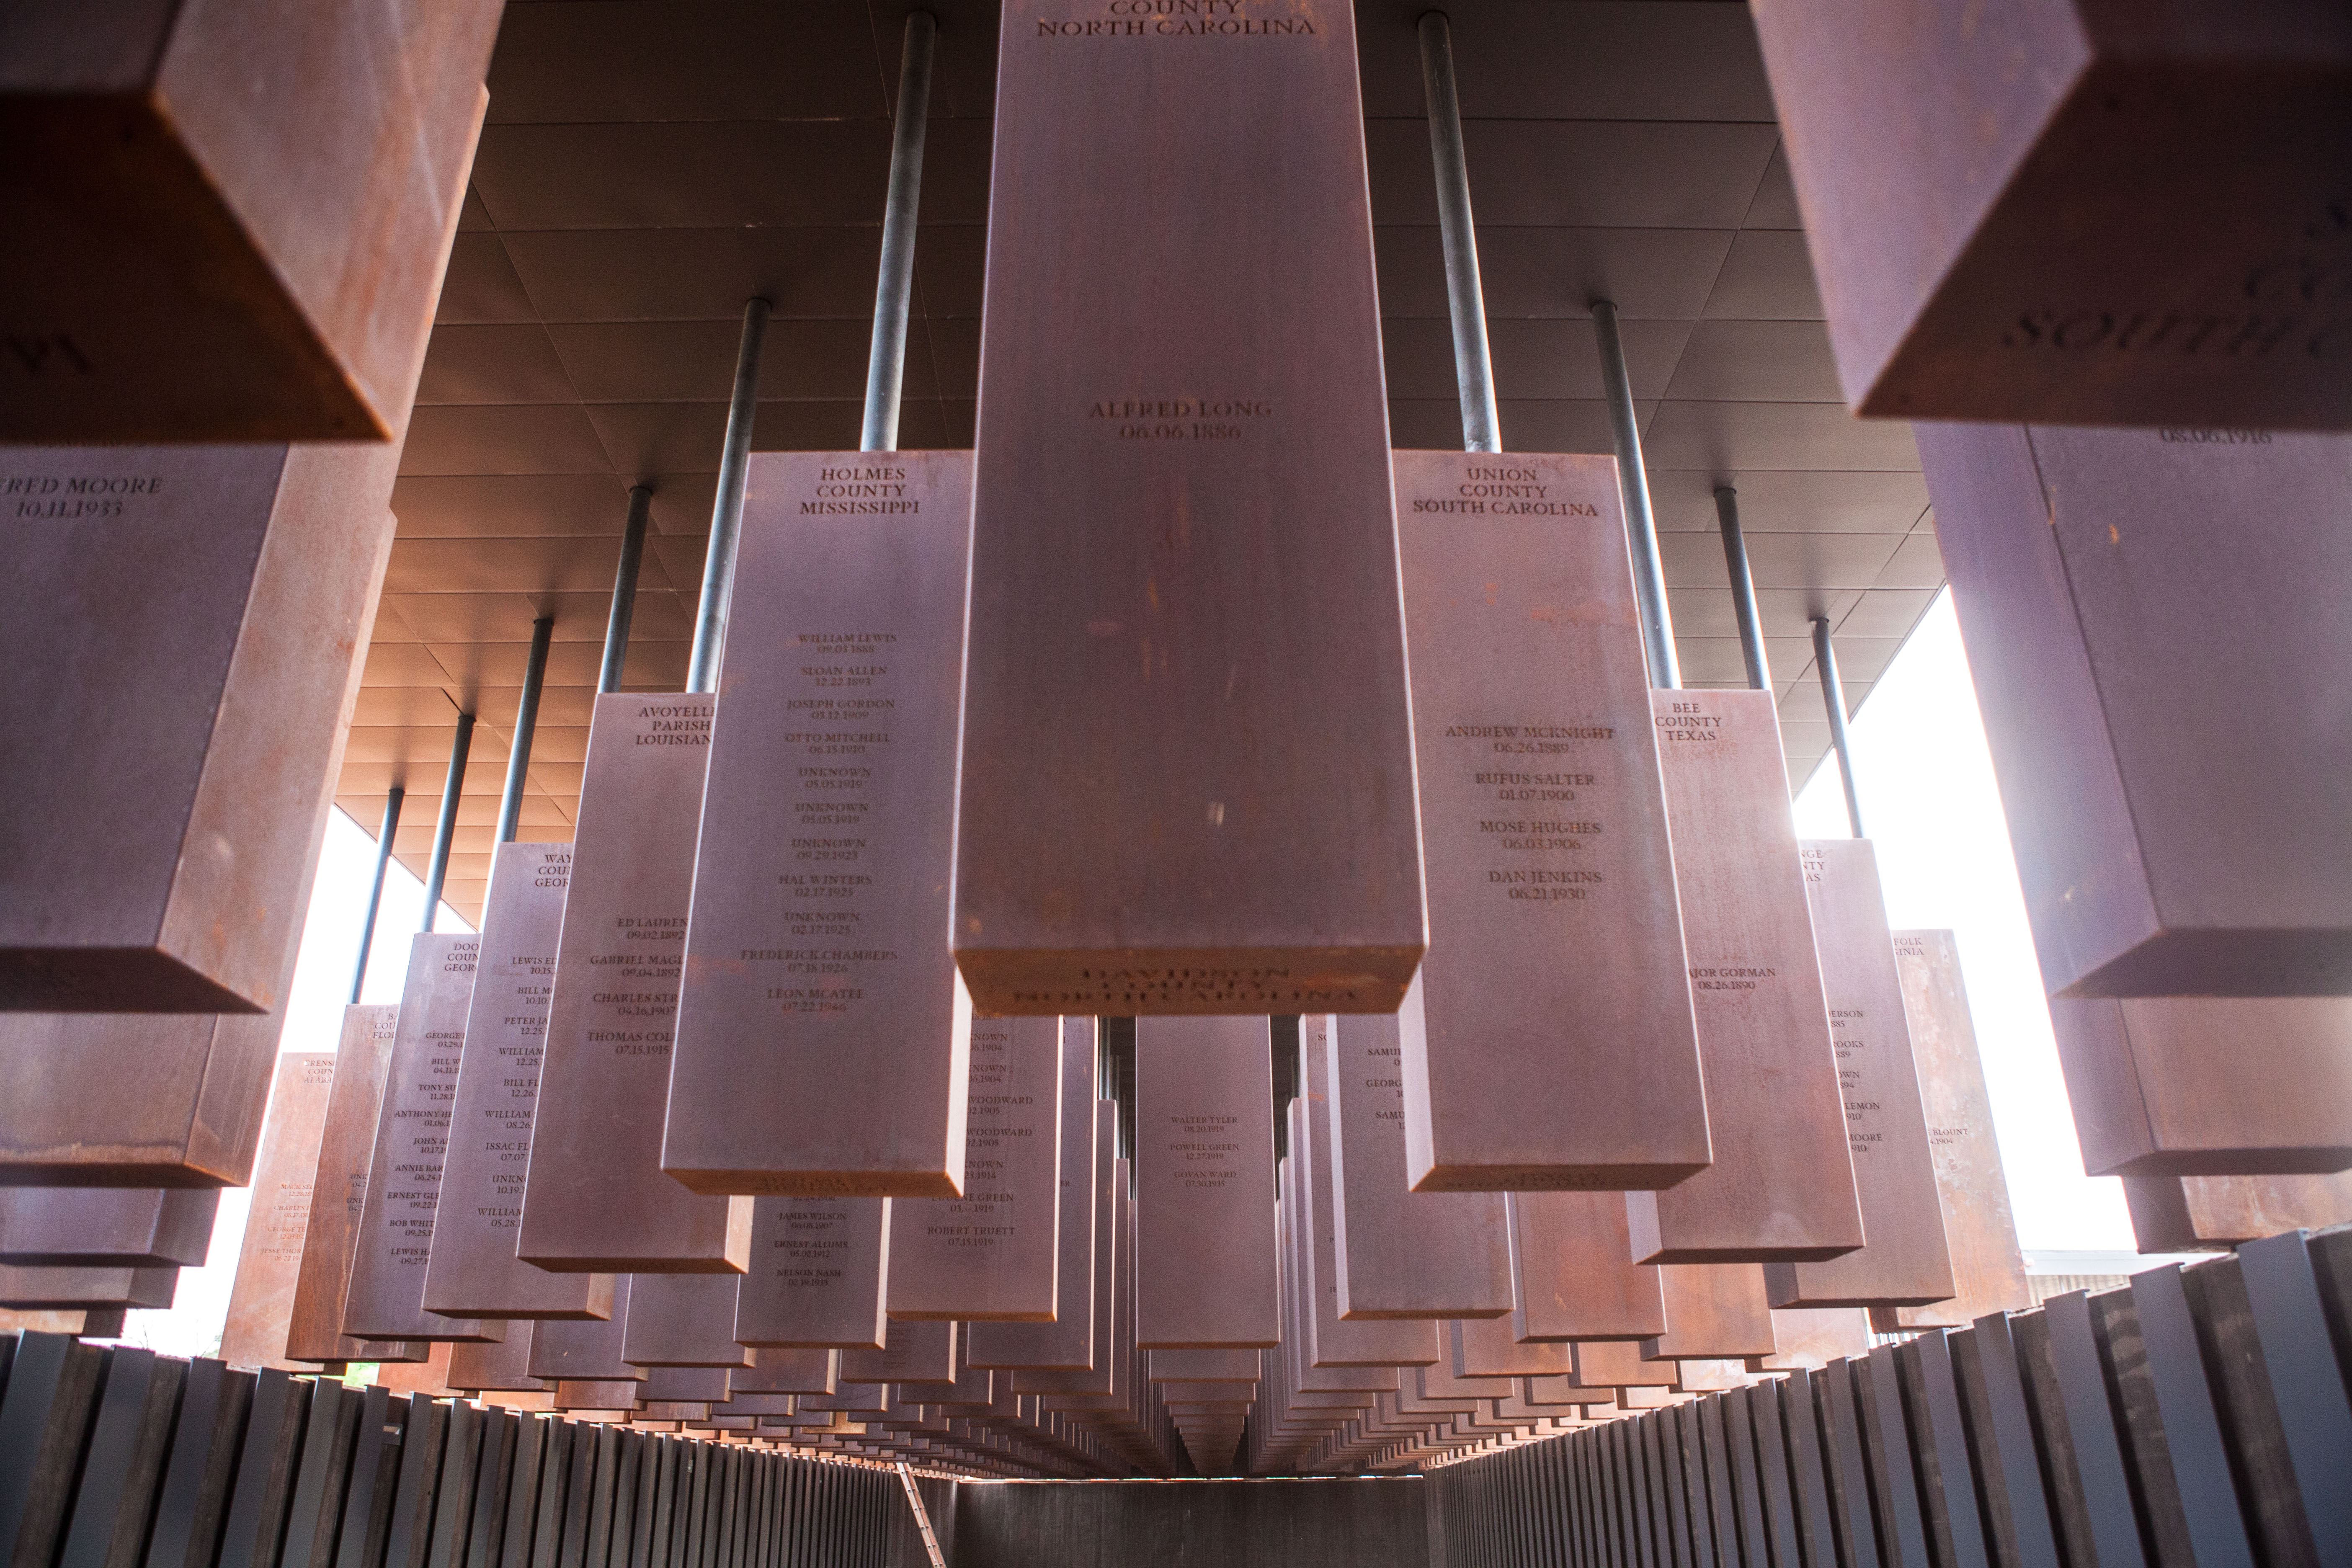 The memorial corridor at the national memorial for peace and justice